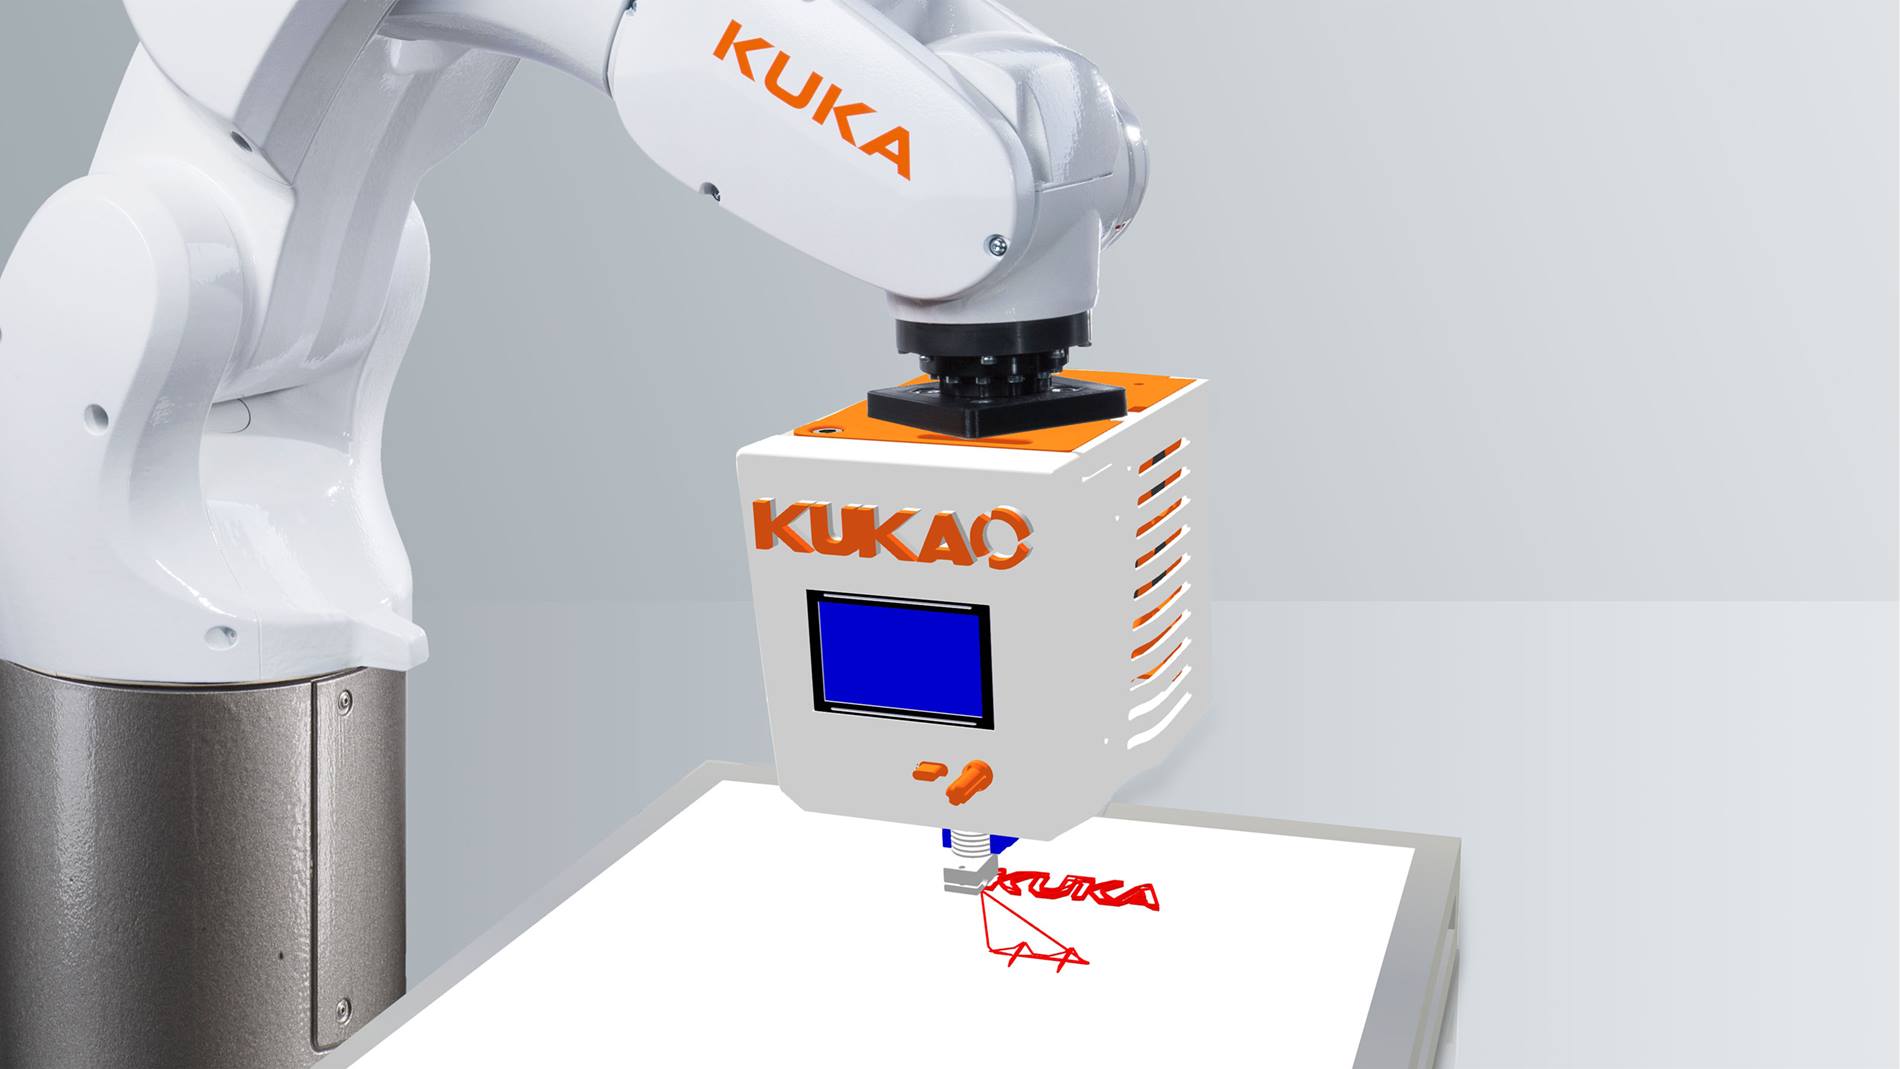 KUKA Robotics competition in France